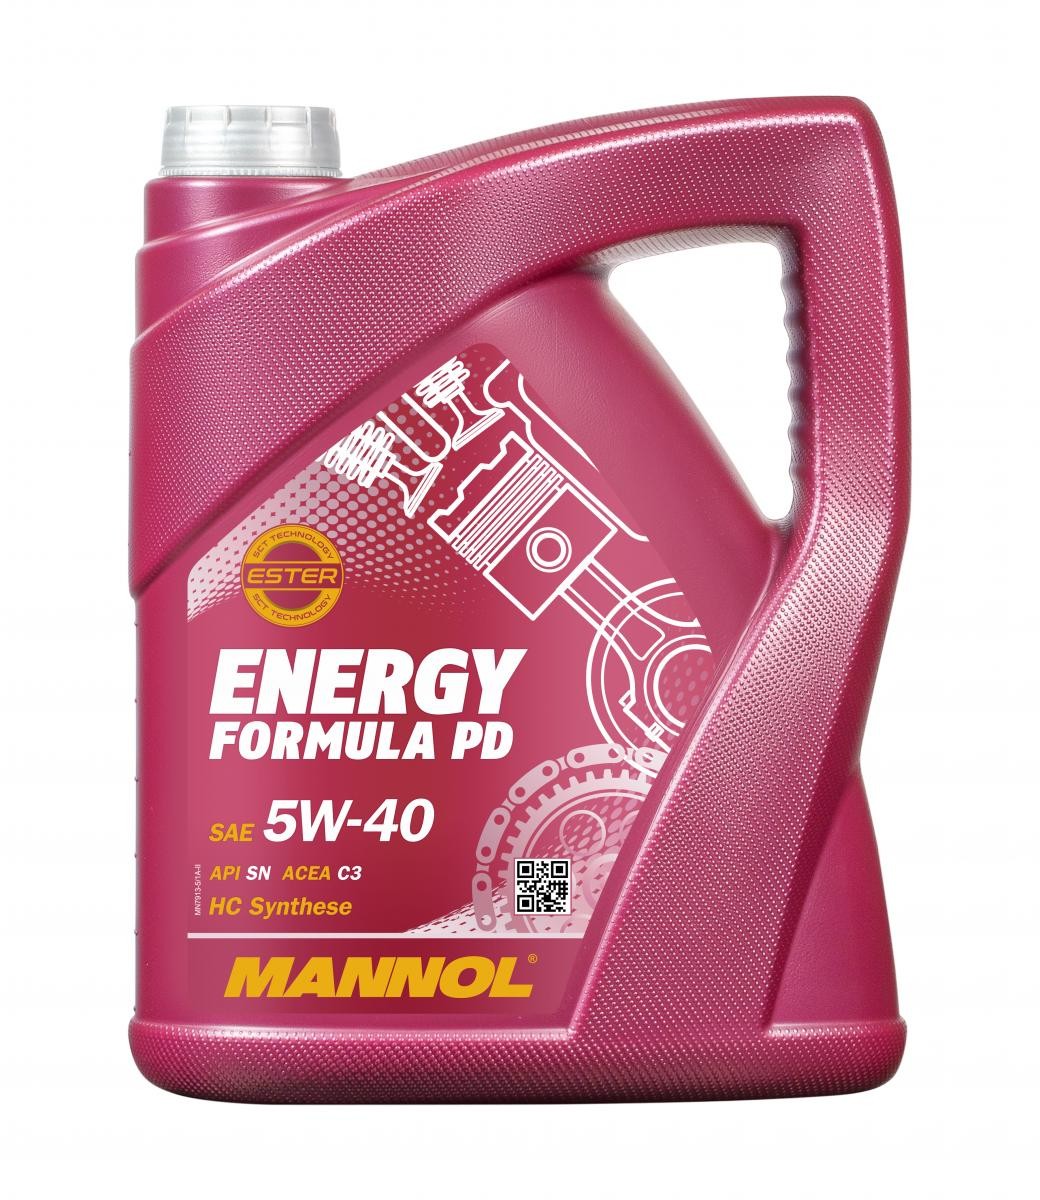 MANNOL ENERGY FORMULA PD MN7913-5 Olie 5W-40, 5L, Synthetische olie